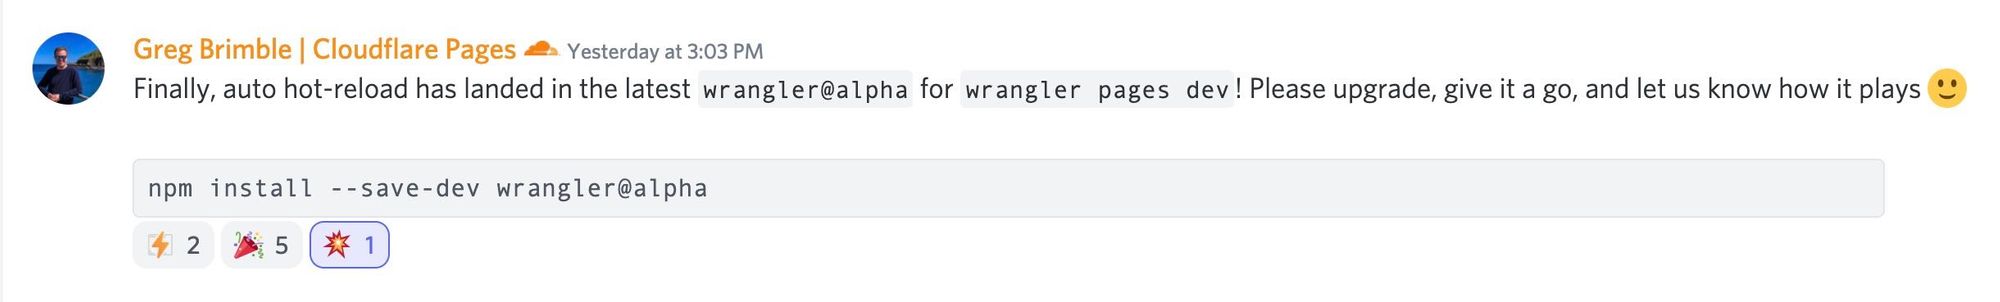 Screenshot from Discord message by Greg Brimble. Says "Finally, auto hot-reload has landed in the latest wrangler@alpha for wrangler pages dev! Please upgrade, give it a go, and let us know how it plays ".  Code snippet shows: "npm install --save-dev wrangler@alpha"